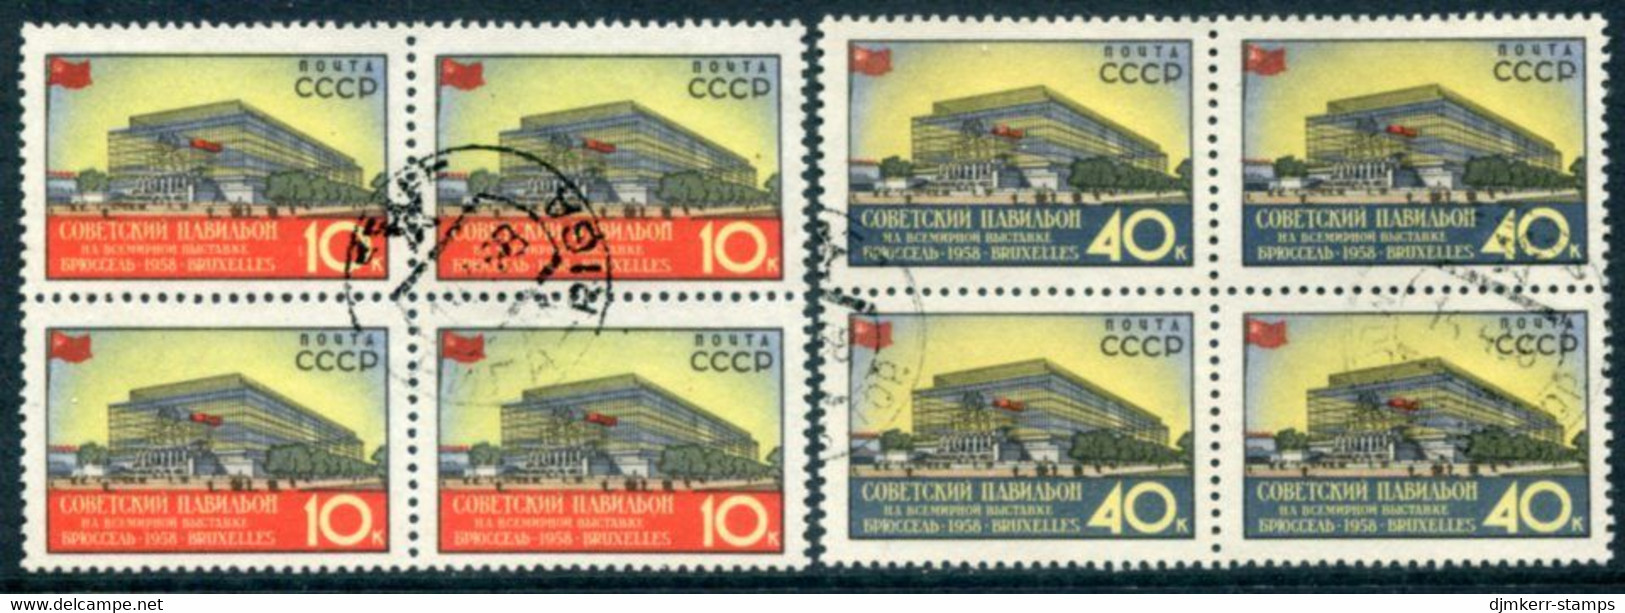 SOVIET UNION 1958 World Exhibition Perforated Blocks Of 4 Used .  Michel 2068-69 A - Oblitérés